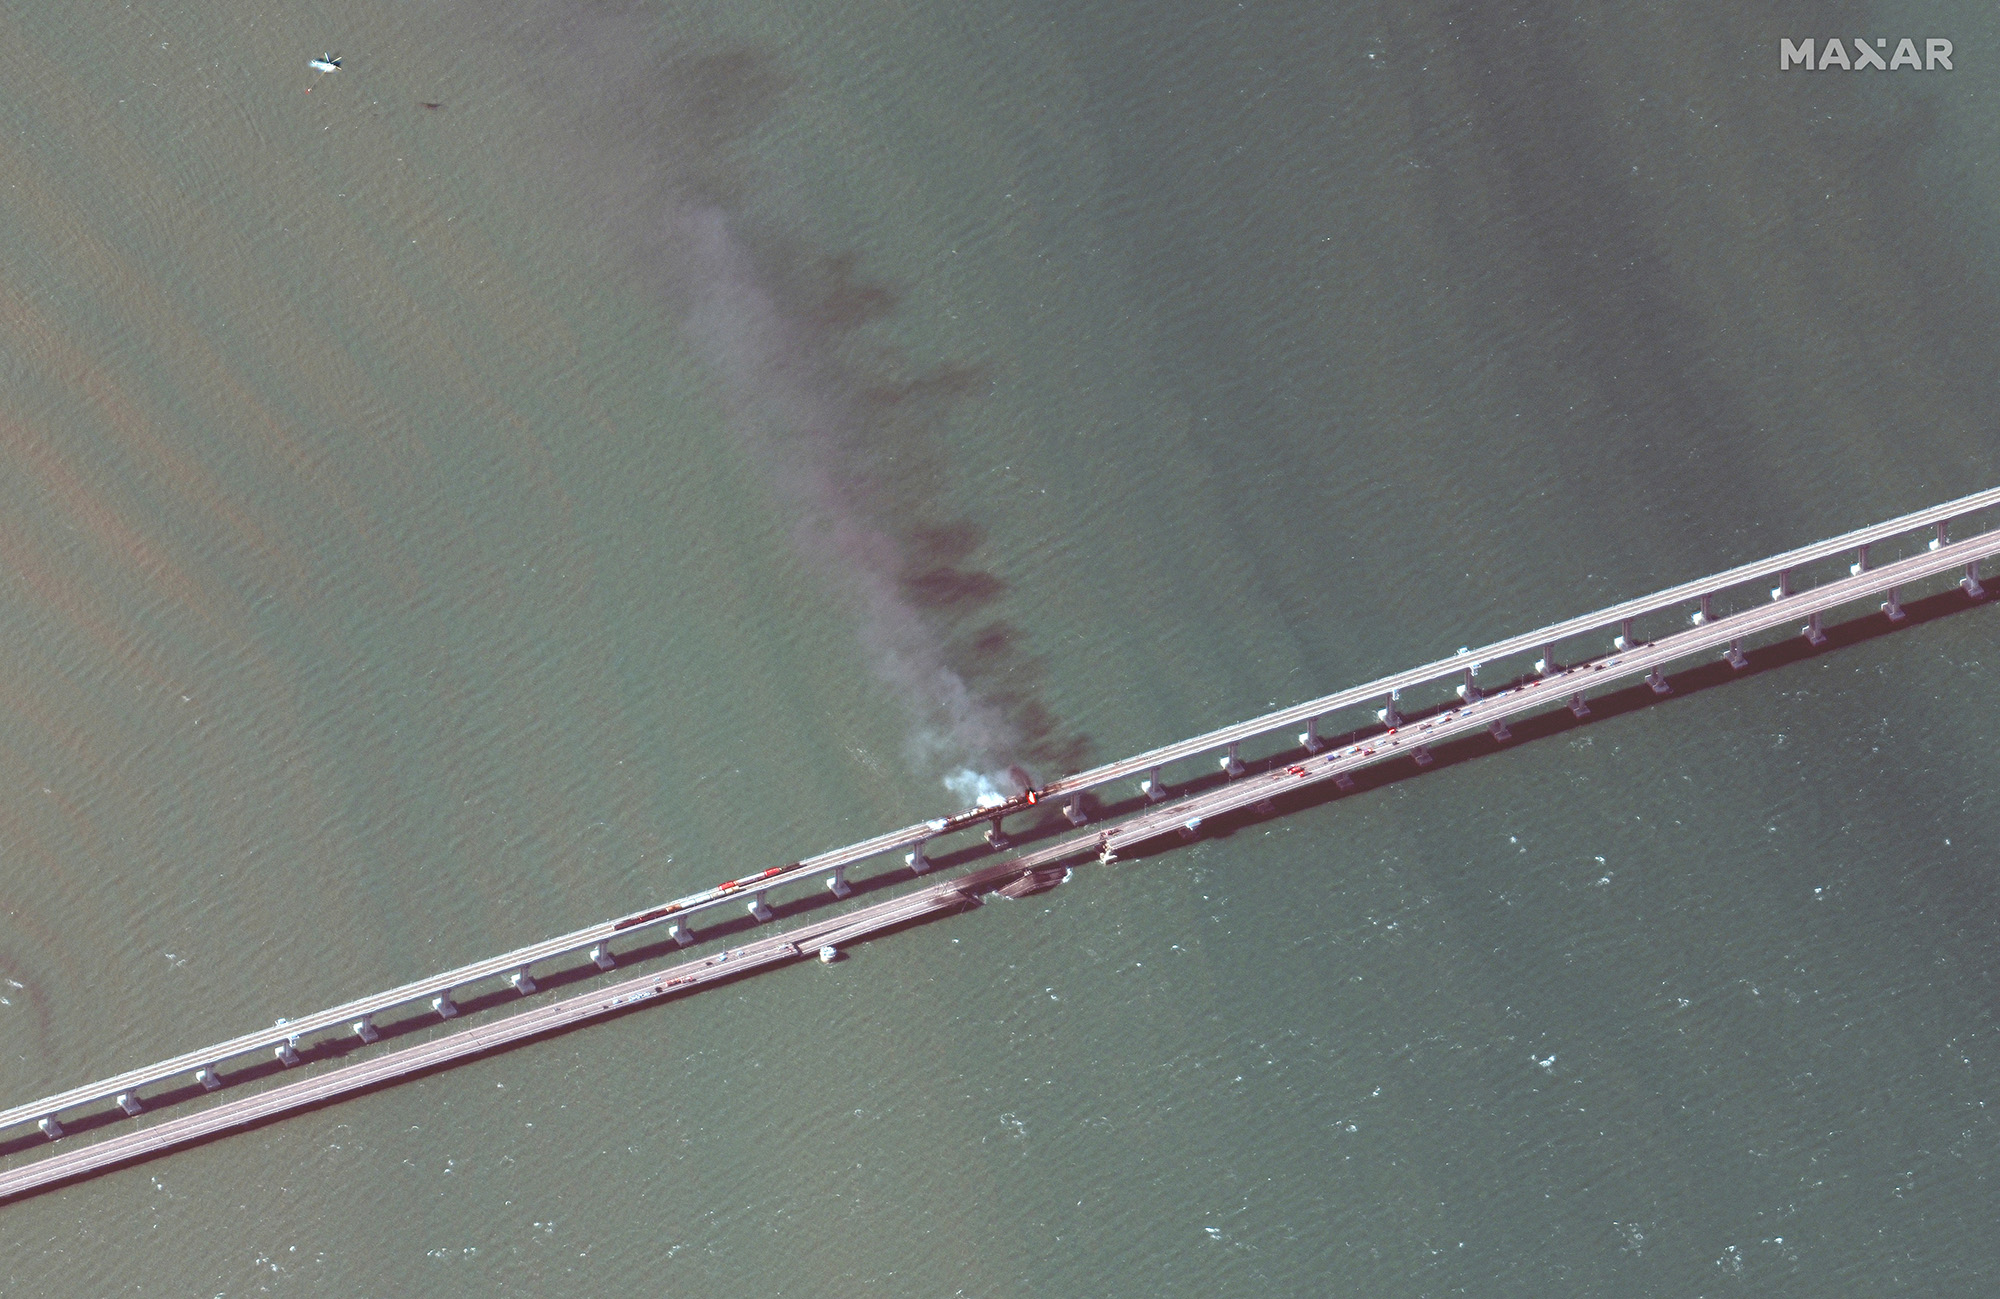 A satellite image shows smoke rising from a fire on the Kerch bridge in the Kerch Strait, Crimea, on October 8.